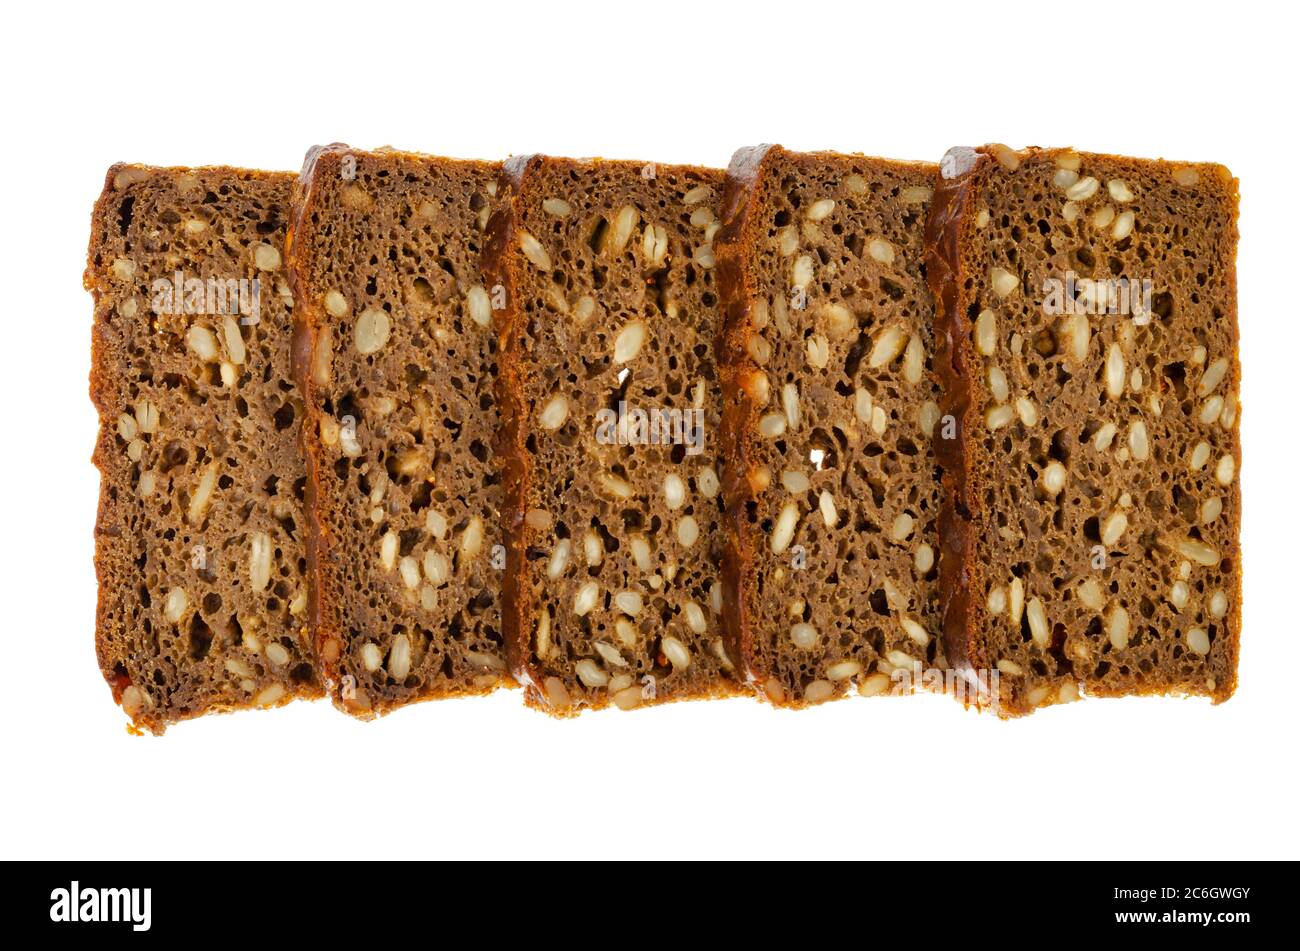 Slices of brown rye bread with sunflower seeds isolated on white background. Stock Photo